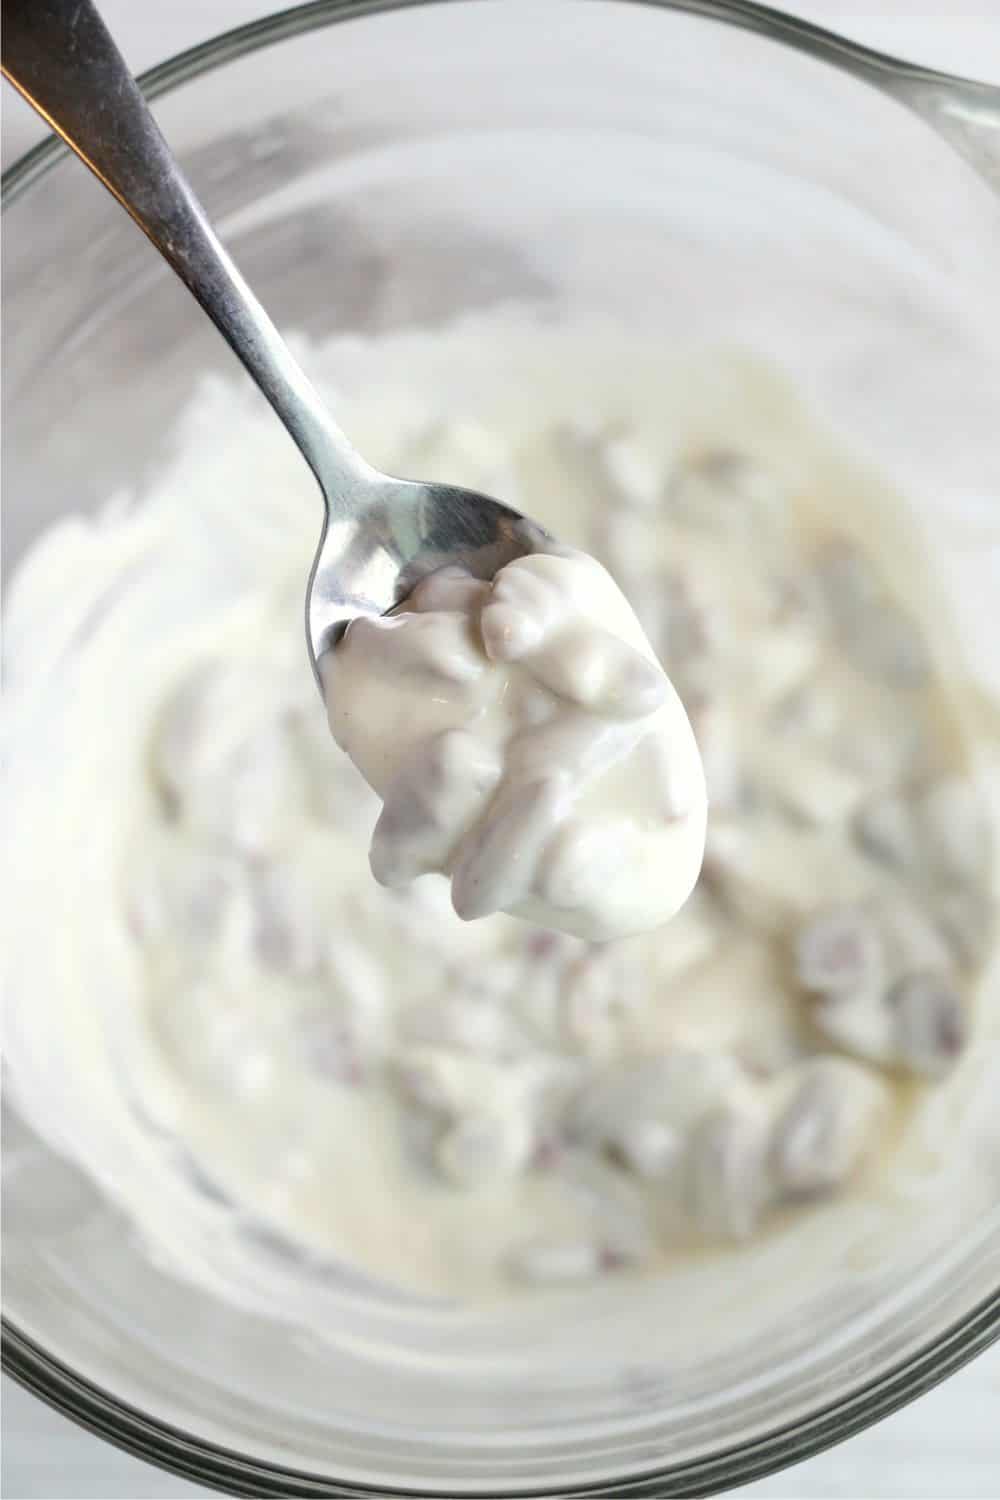 white chocolate and pecan mixture sticking to a spoon above the bowl